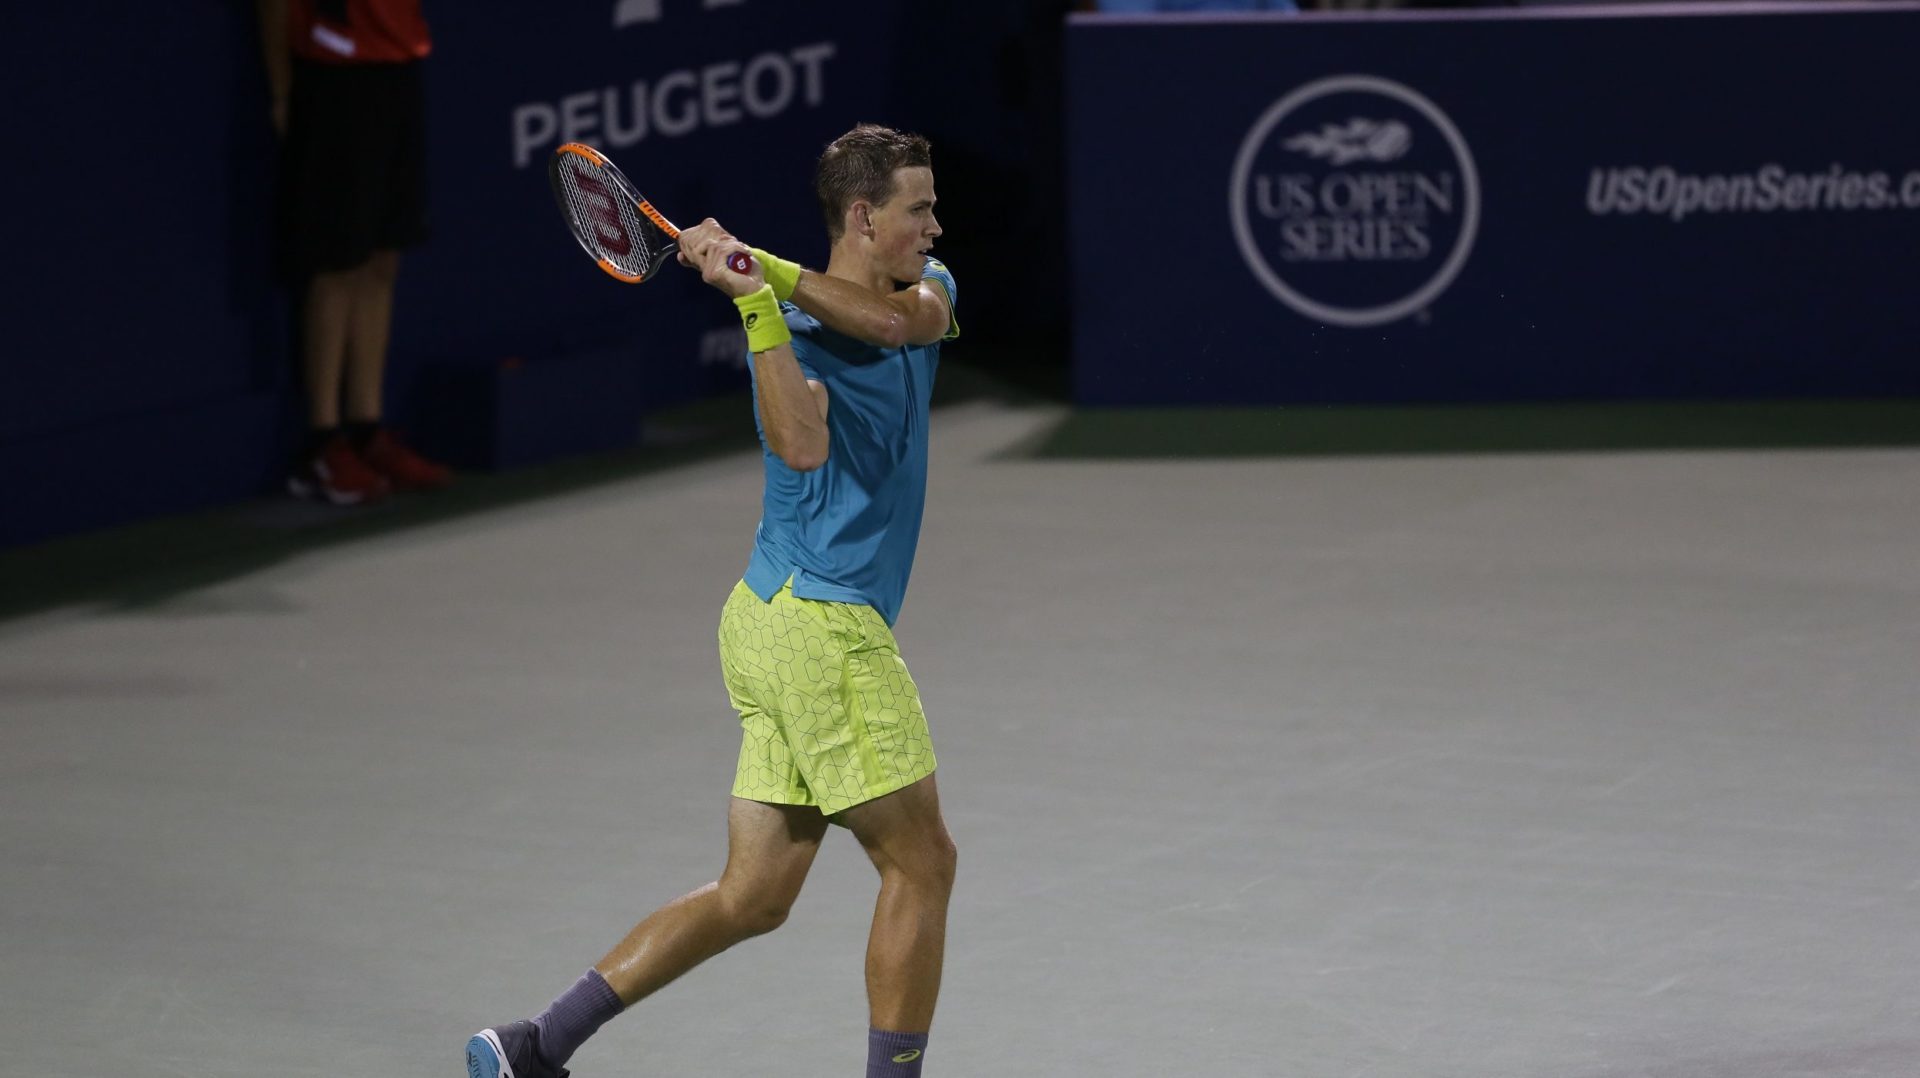 Pospisil to lead Canadian Contingent at the Granby National Bank ...